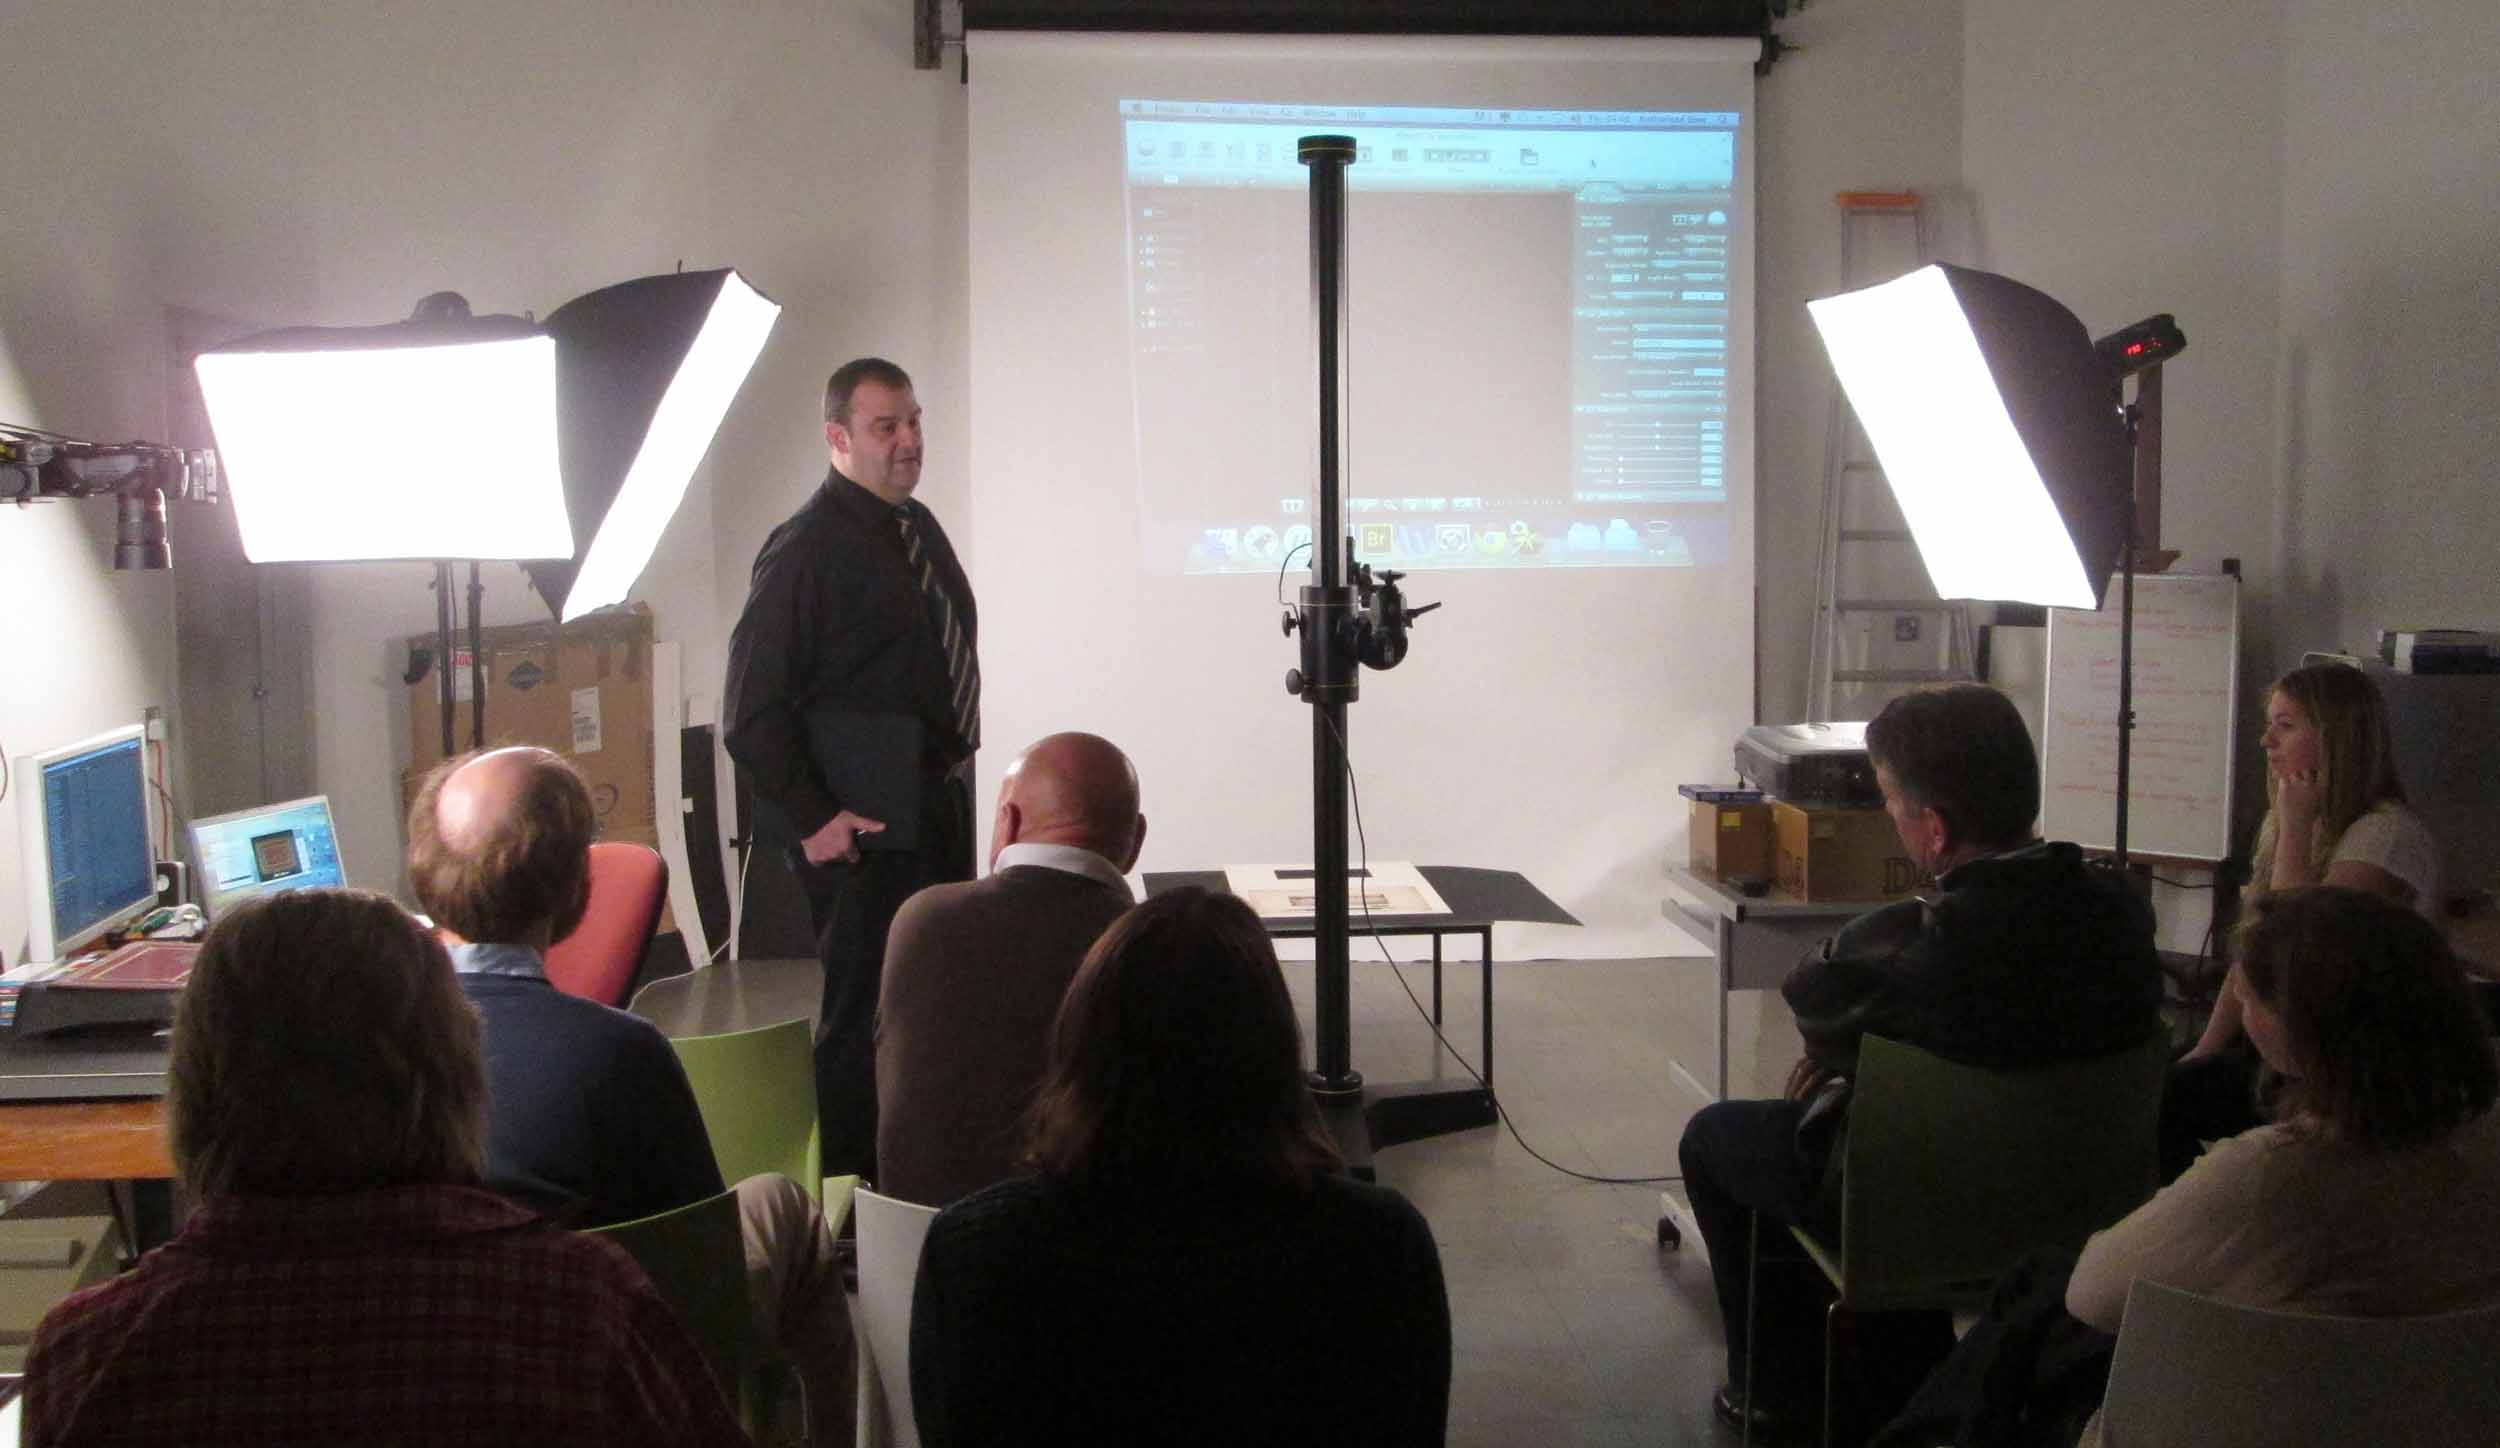 Stephen McCann presents to the LEAP team on the capabilities of the University of Glasgow Photographic Unit, 2013. Copyright Livingstone Online. Creative Commons Attribution-NonCommercial 3.0 Unported (https://creativecommons.org/licenses/by-nc/3.0/).